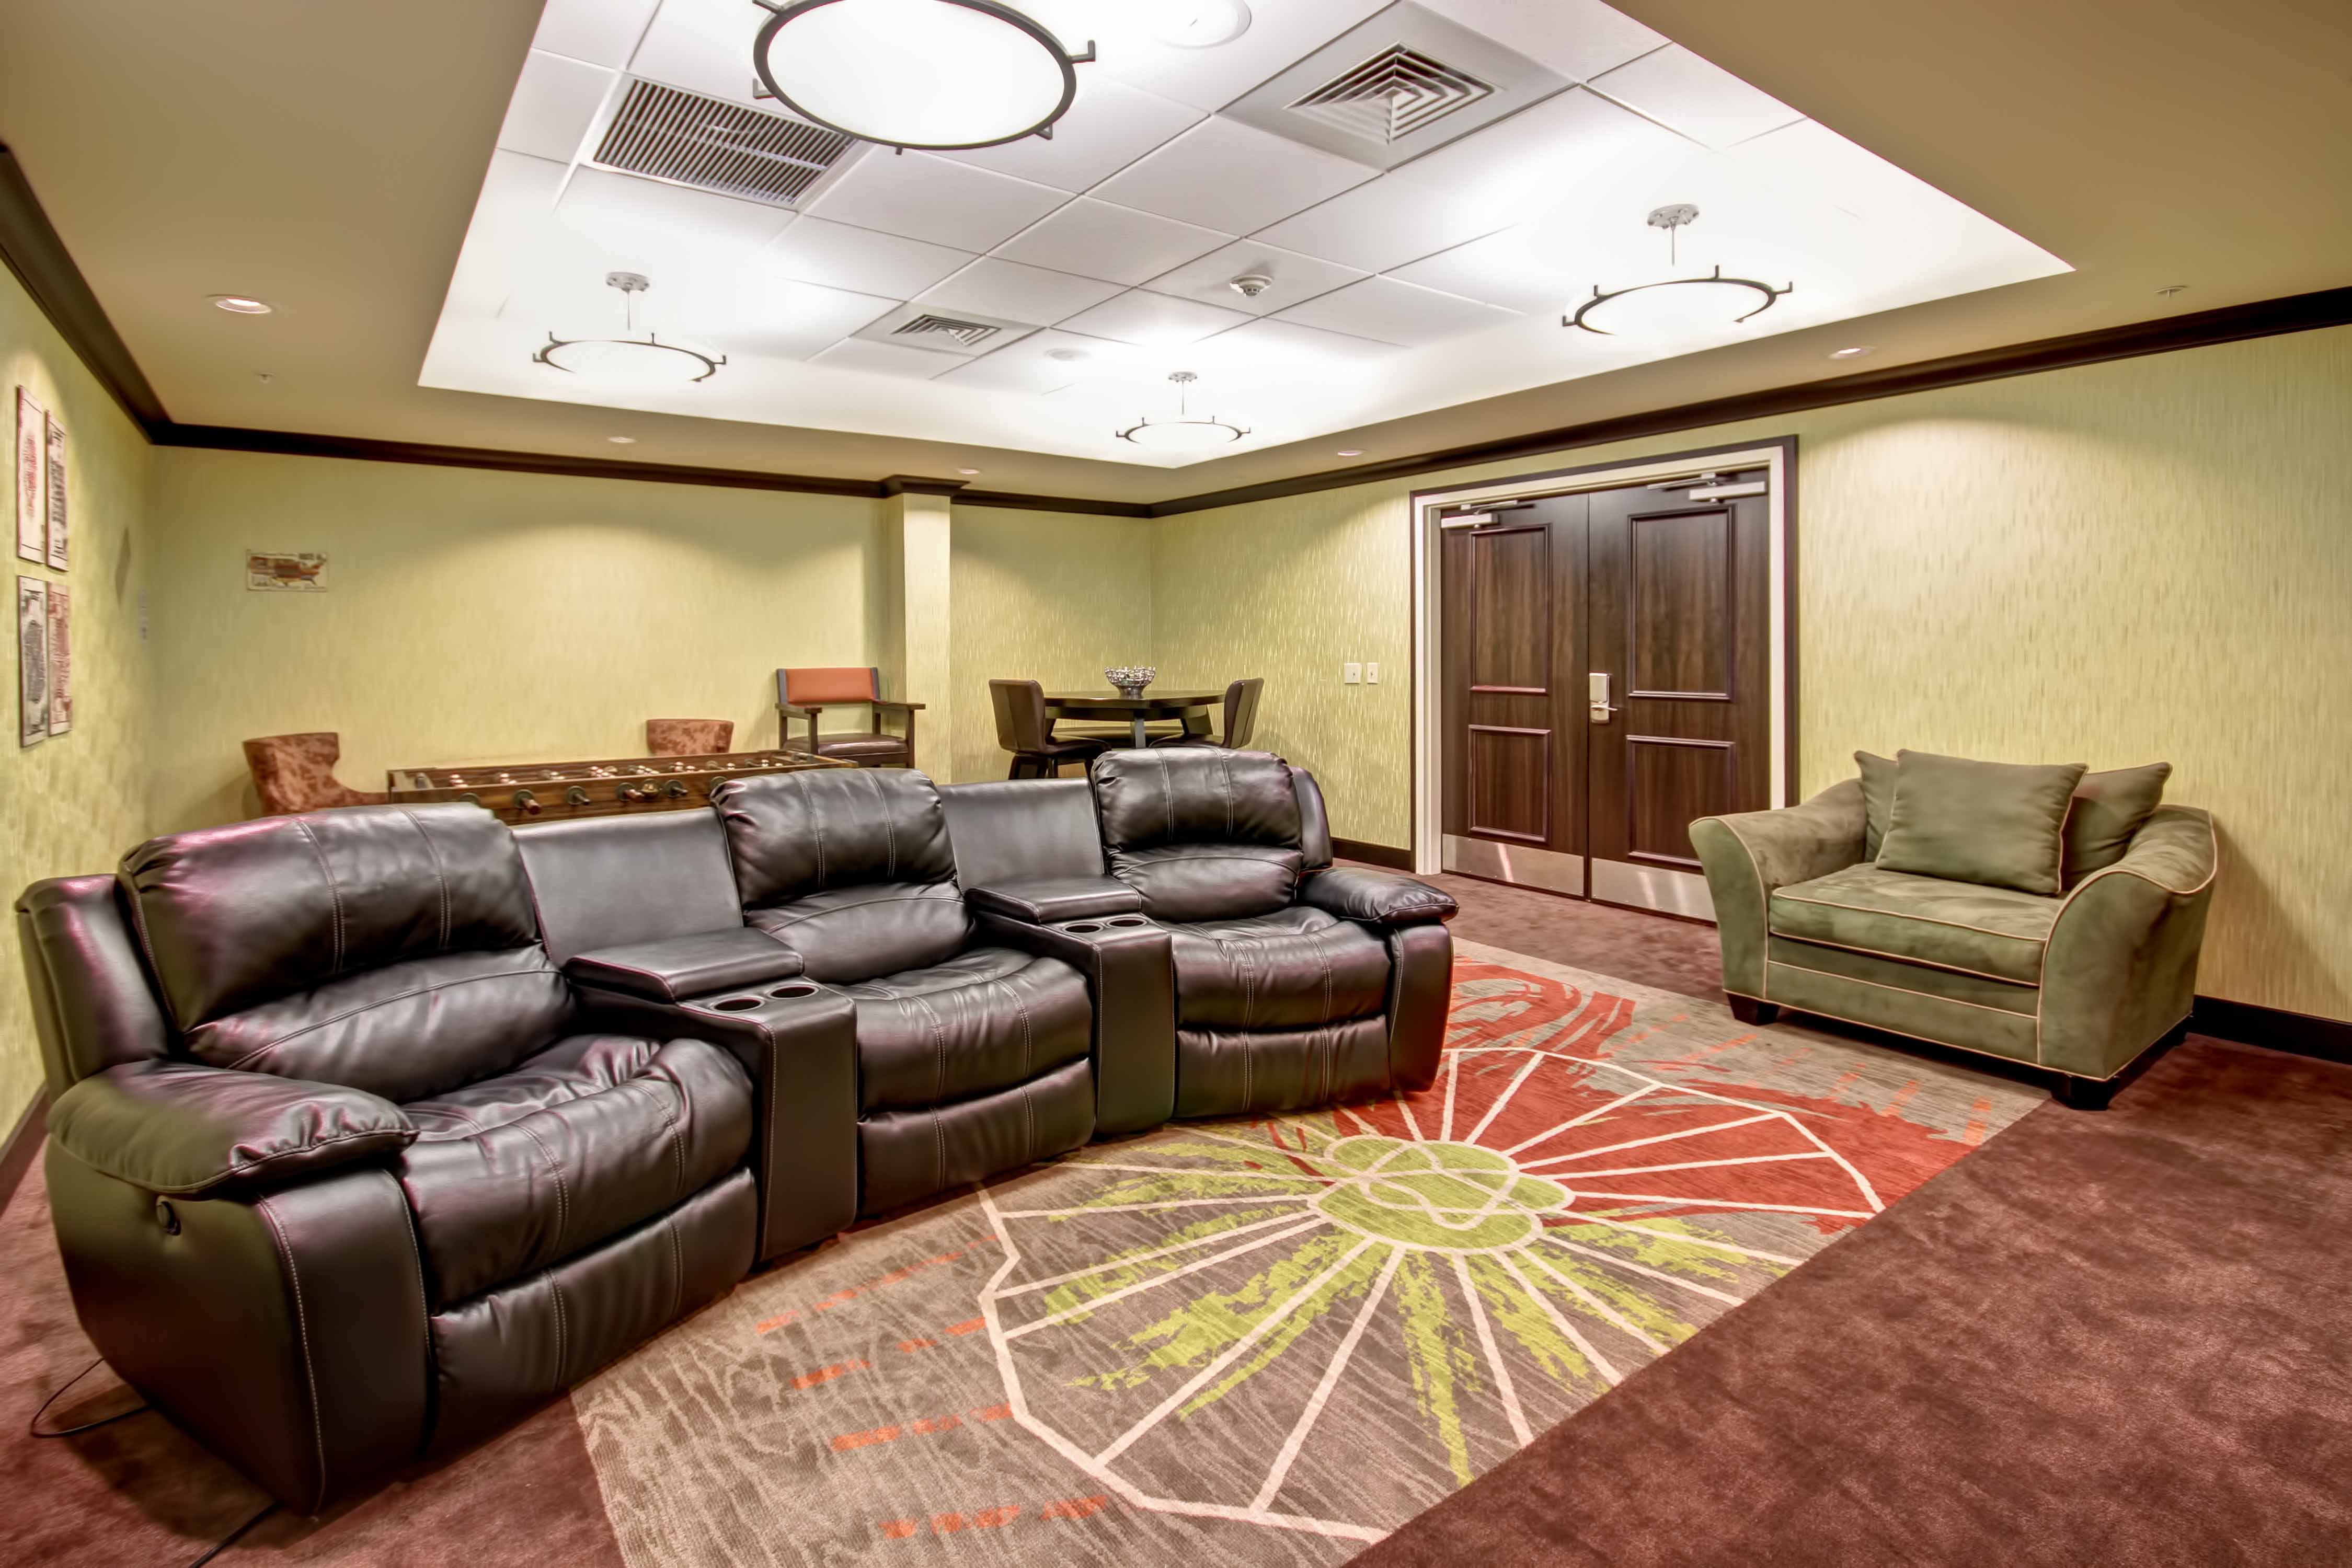 Game room with theater-style recliner chairs